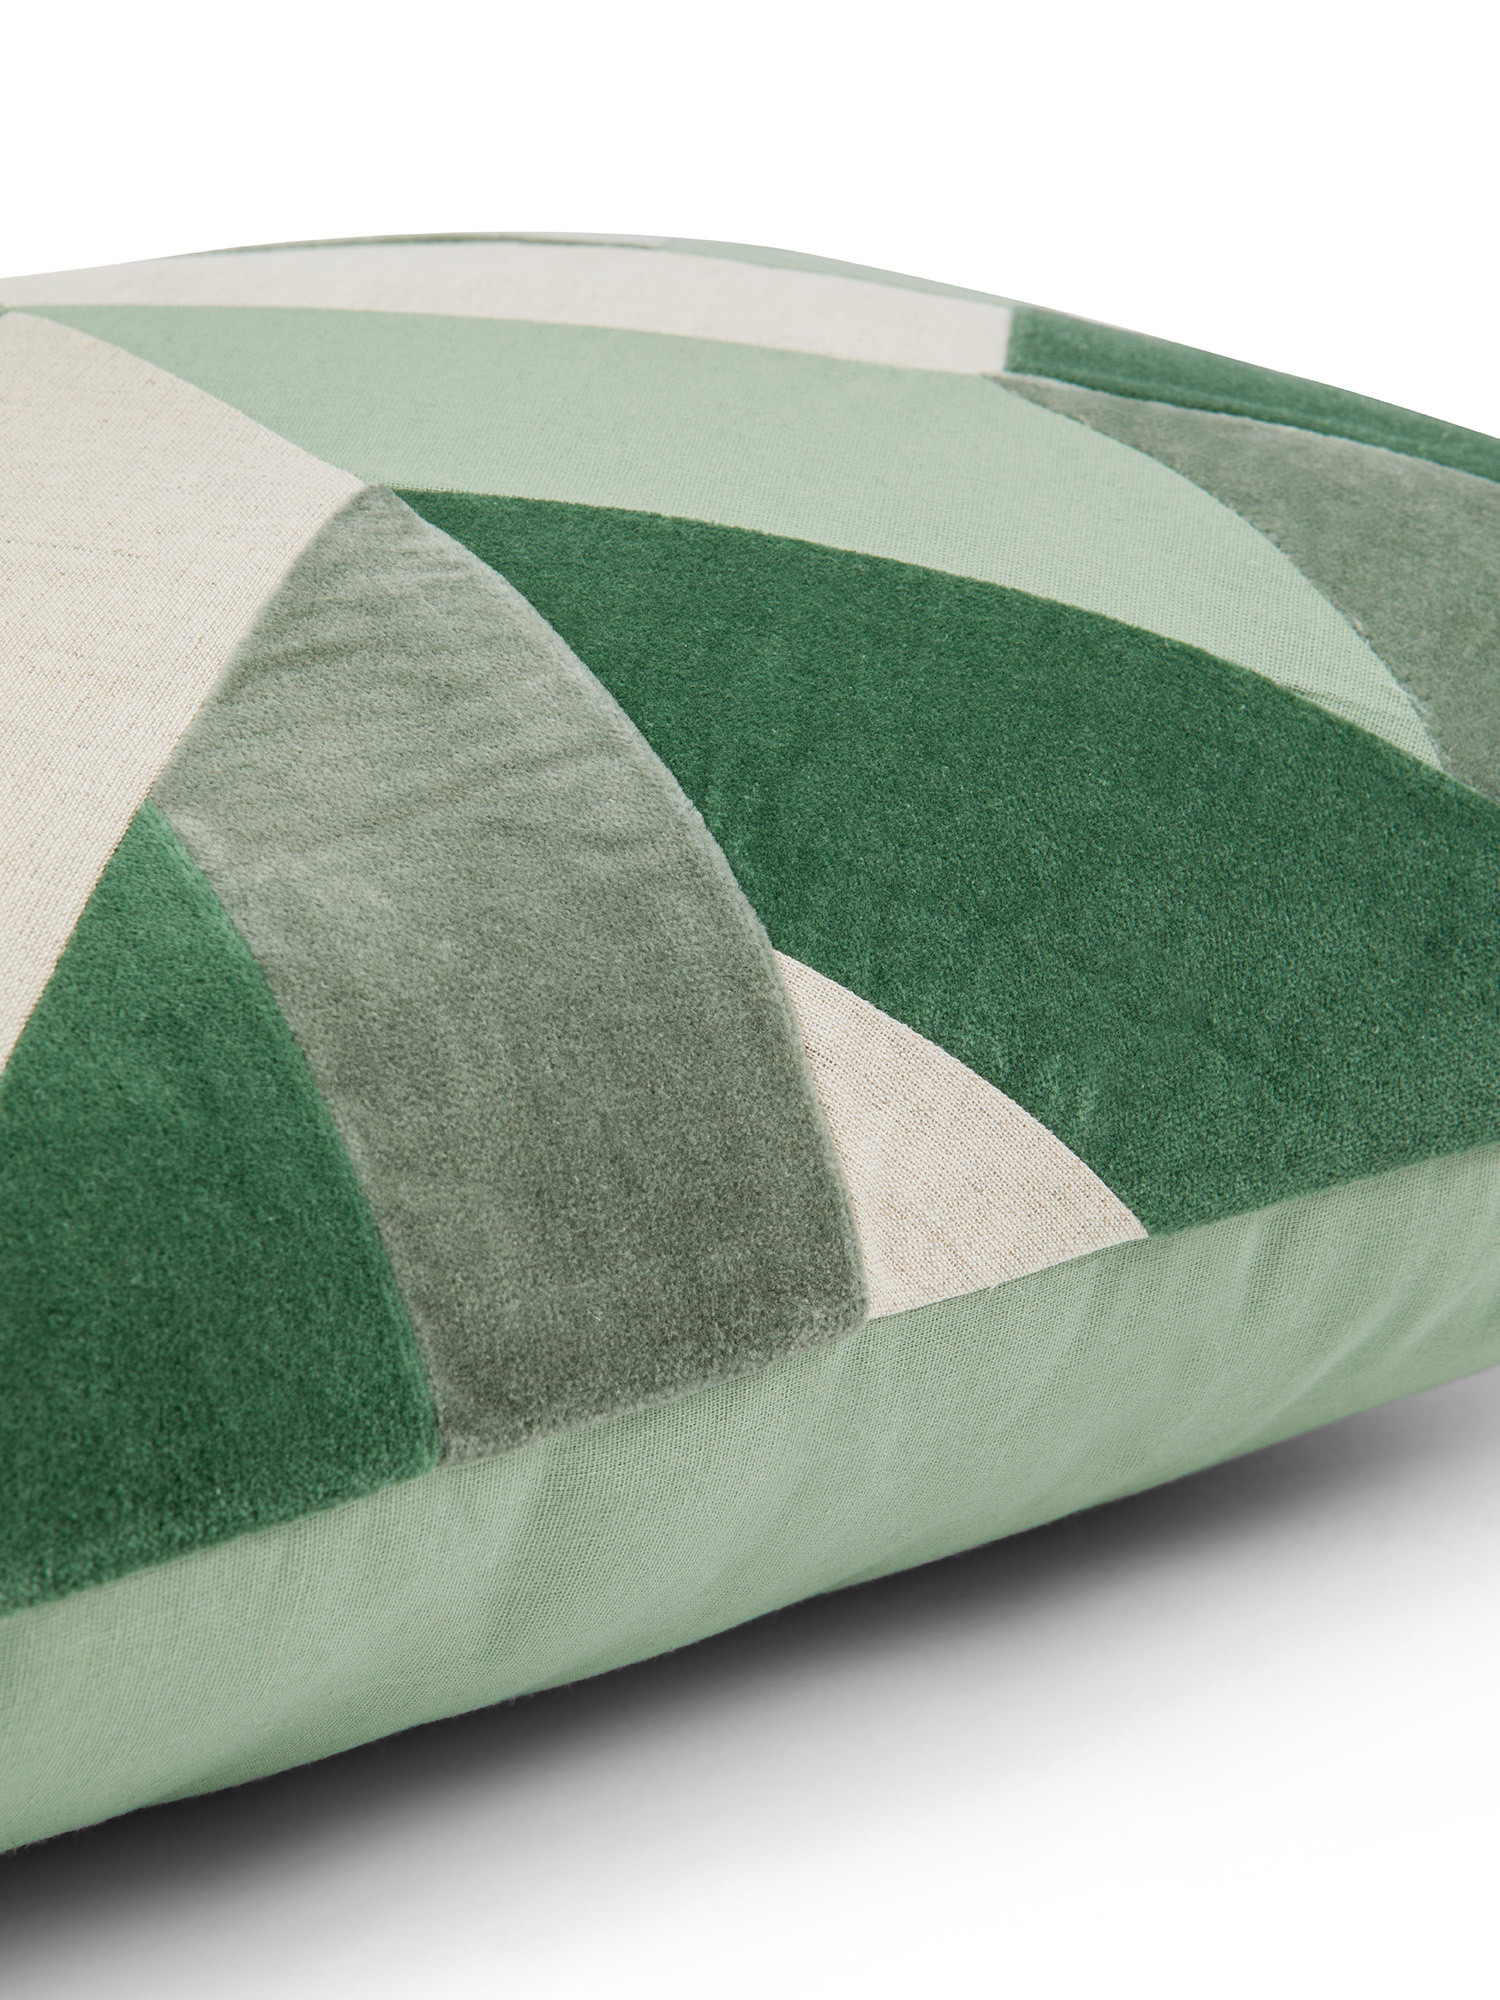 Patchwork cushion mix canvas and velvet geometric patterns 35X50cm, Green, large image number 2